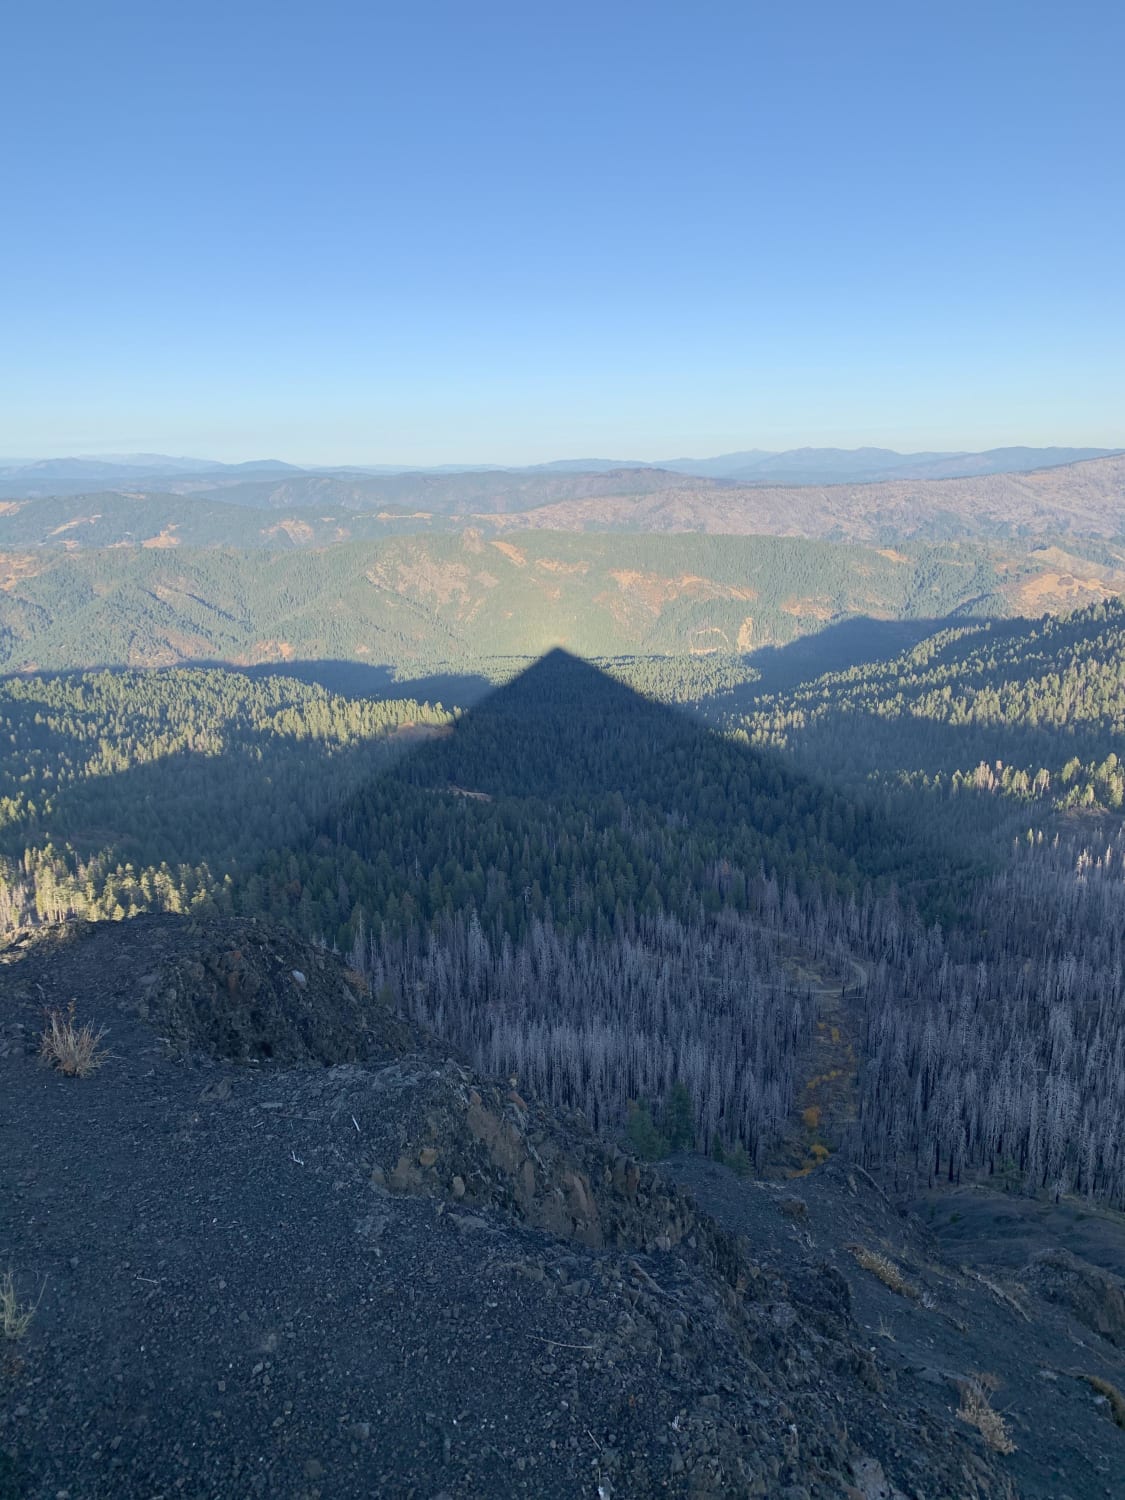 Pyramid shadow on the peak of Black Lassic in six rivers National forest